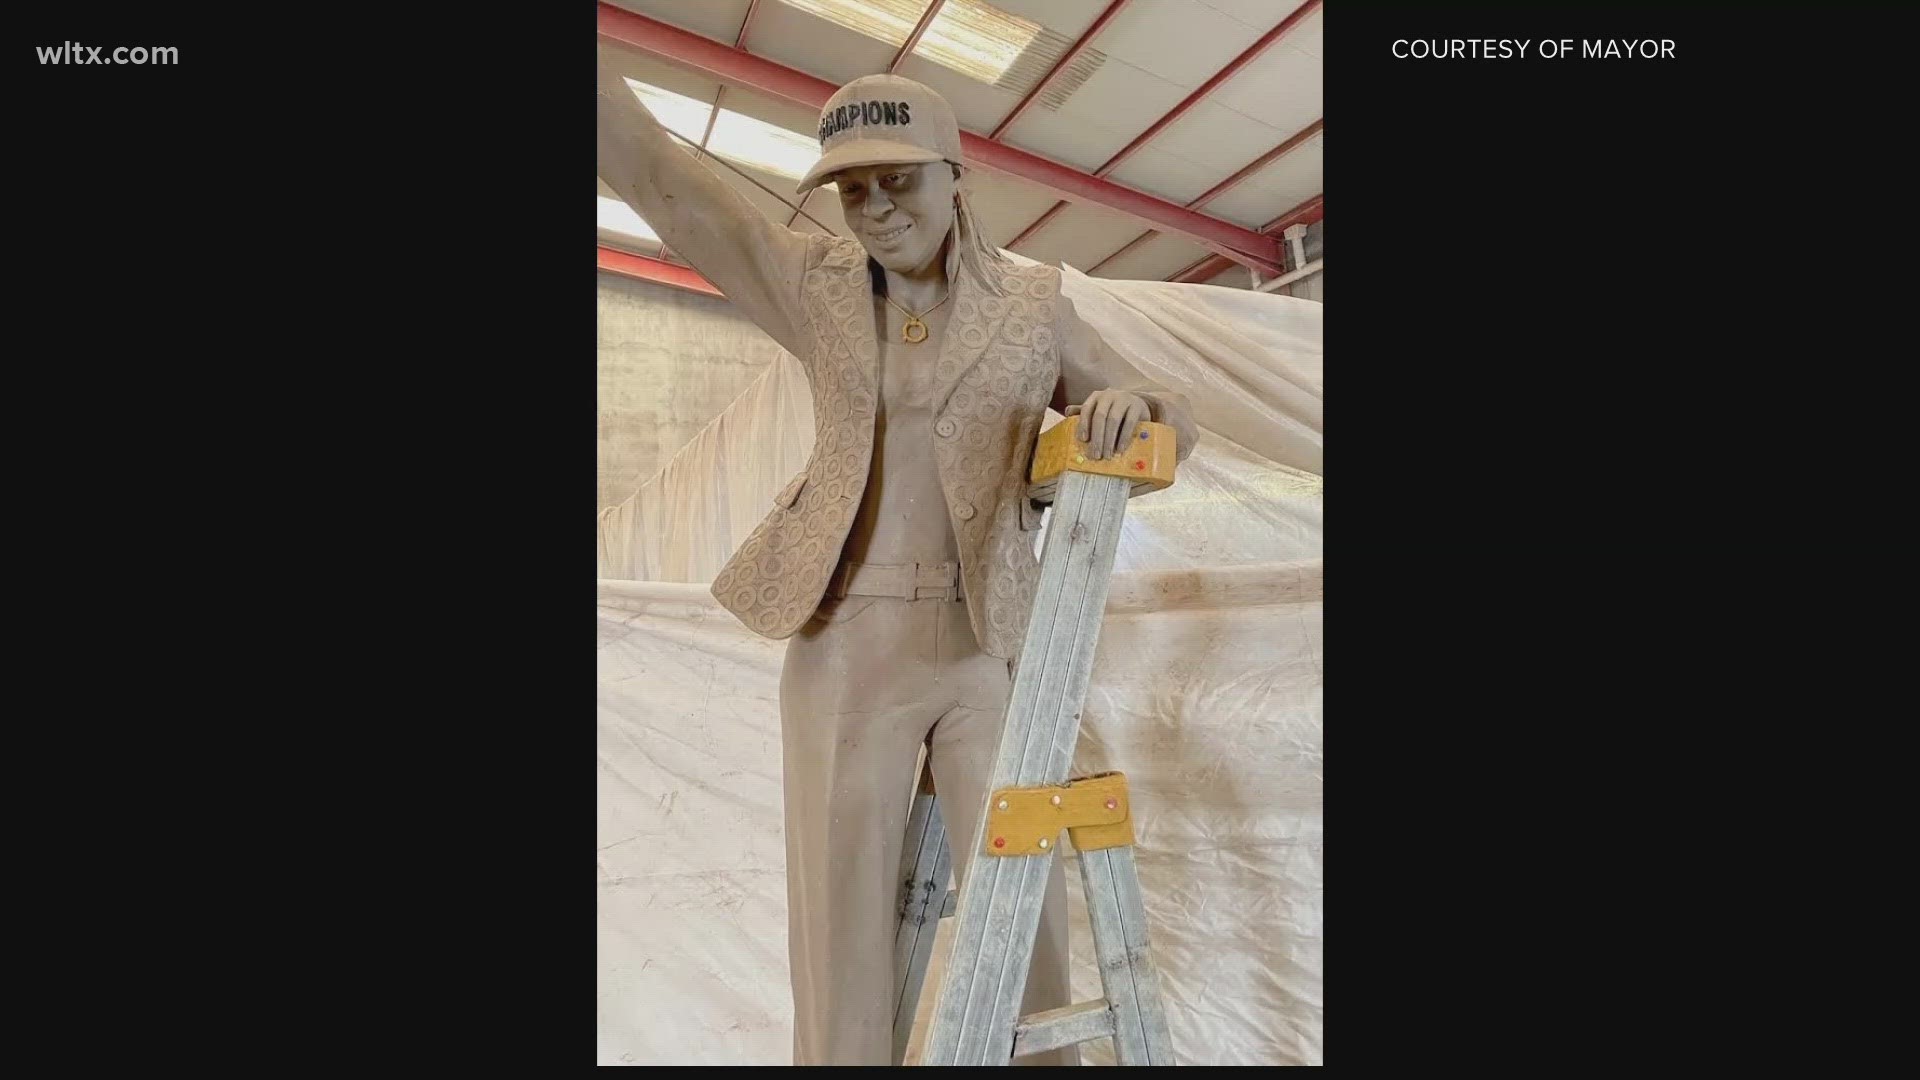 The statue of the coach will be placed in downtown Columbia.